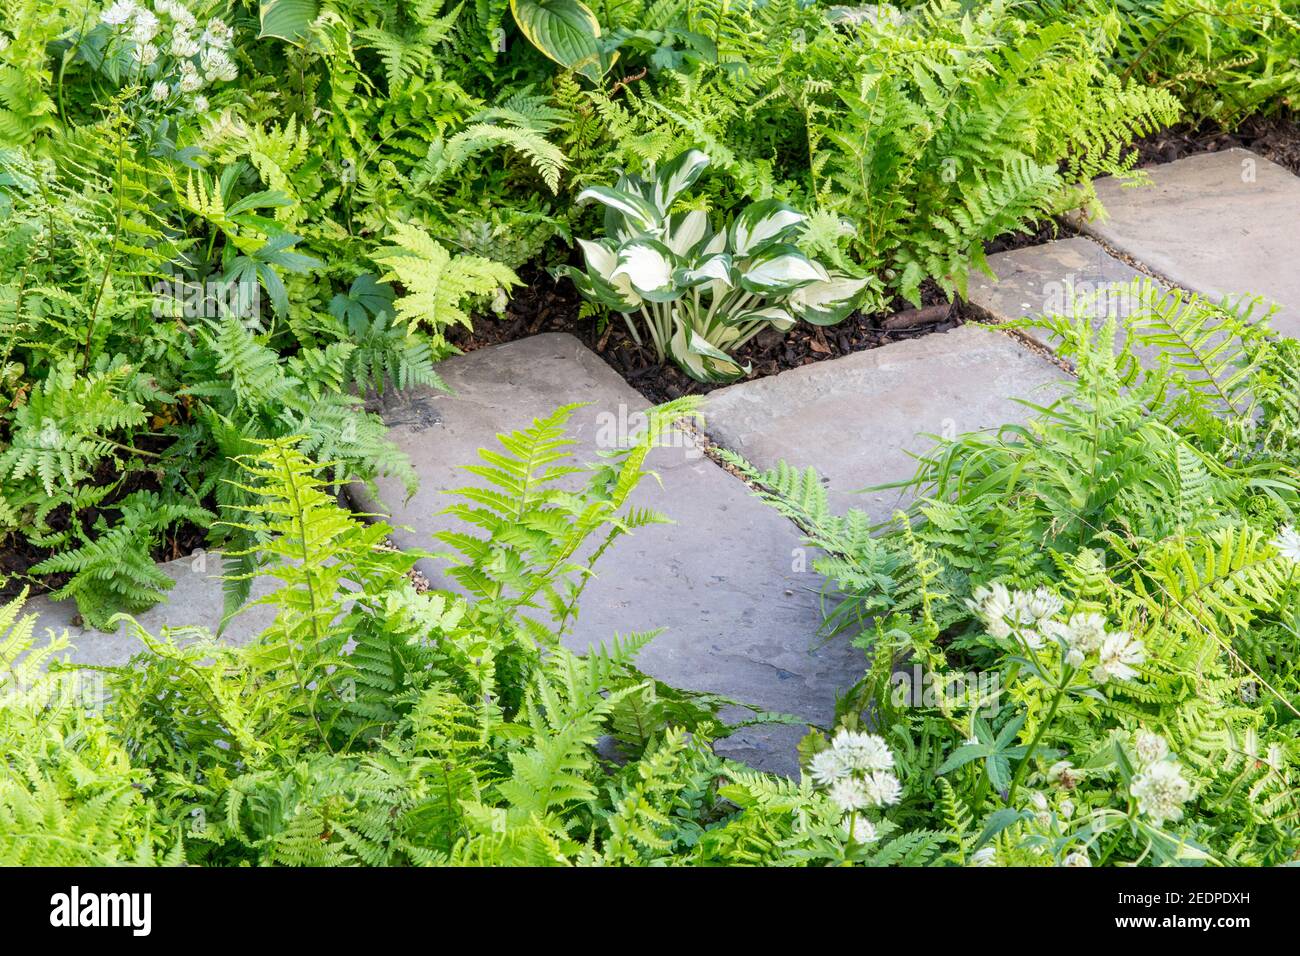 An English shady front garden stone slabs paving path with planting of hosta and ferns in a green planting scheme colours colors England GB UK Stock Photo